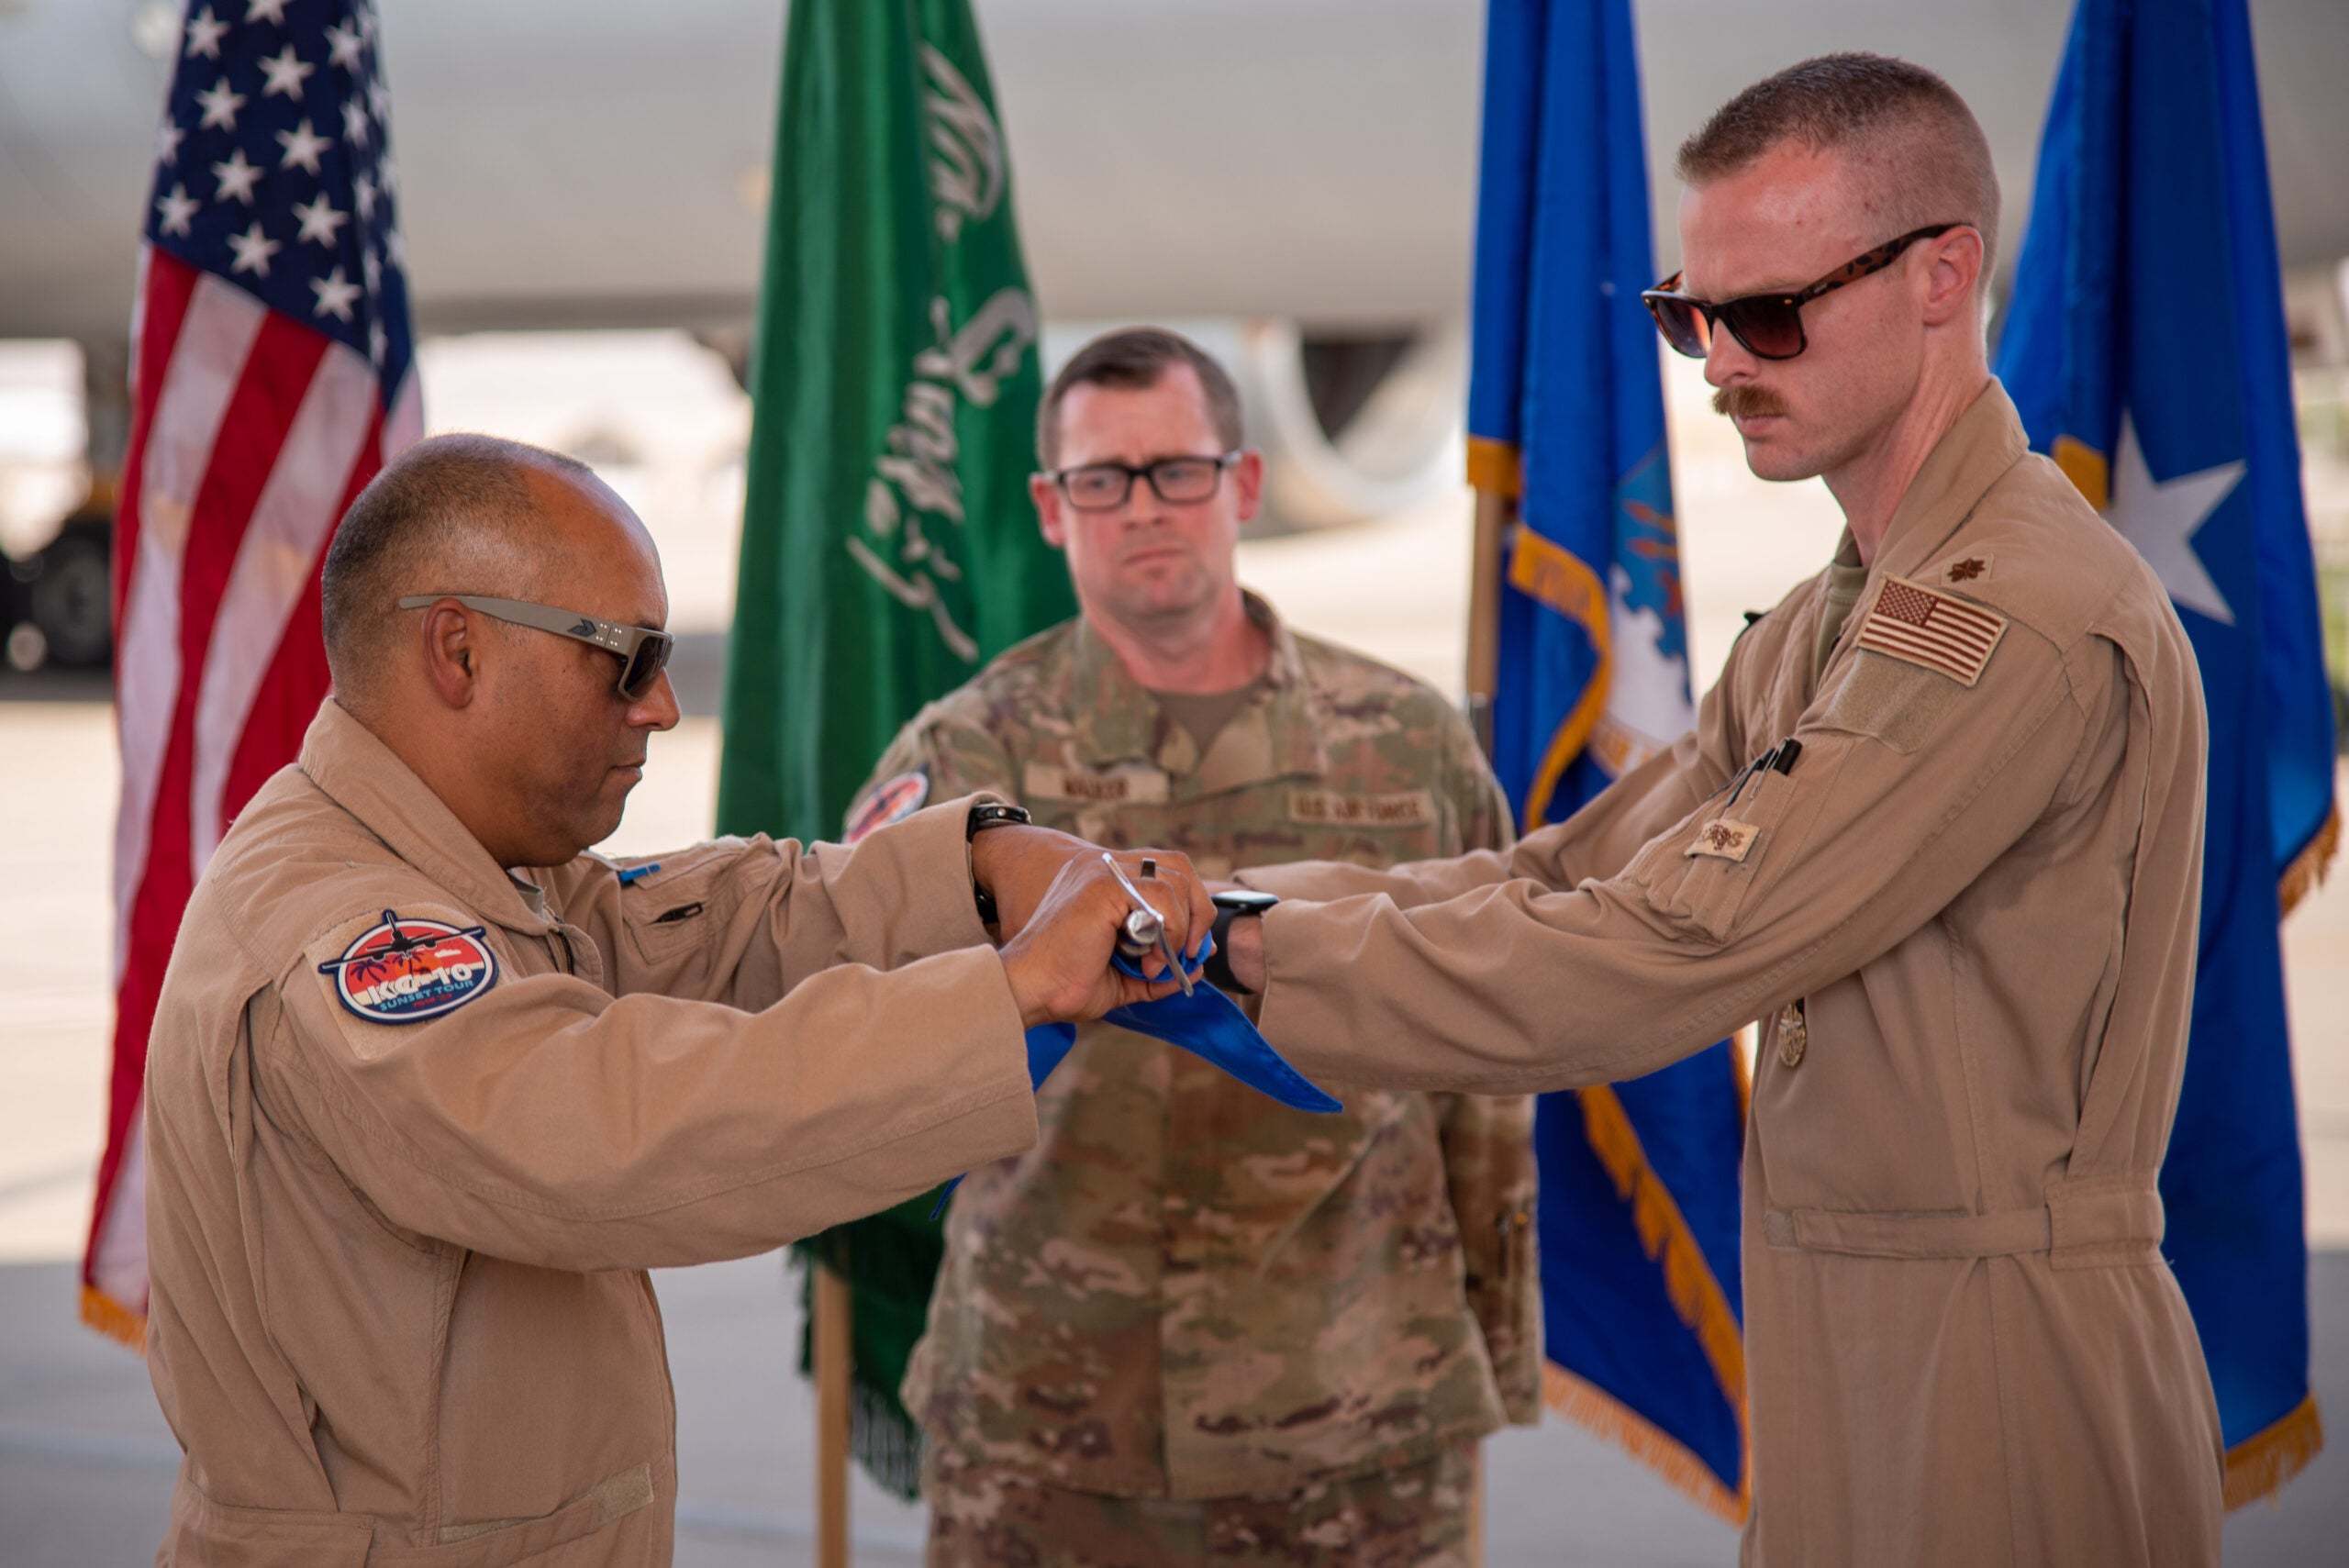 U.S. Air Force Maj. Joseph Rush (right), 908th Expeditionary Air Refueling Squadron (EARS) commander, and Brig. Gen. Akshai Gandhi (left), 378th Air Expeditionary Wing commander, roll-up the 908th EARS guidon during an inactivation ceremony at Prince Sultan Air Base, Kingdom of Saudi Arabia, Oct. 4, 2023. The ceremony highlighted the legacy of the KC-10 after over 30 years of service within the U.S. Air Forces Central (AFCENT) Area of Responsibility. By September 2024, the U.S. Air Force's fleet of KC-10s will be decommissioned and gradually replaced by the KC-46 aircraft. (U.S. Air Force photo by Tech. Sgt. Alexander Frank)